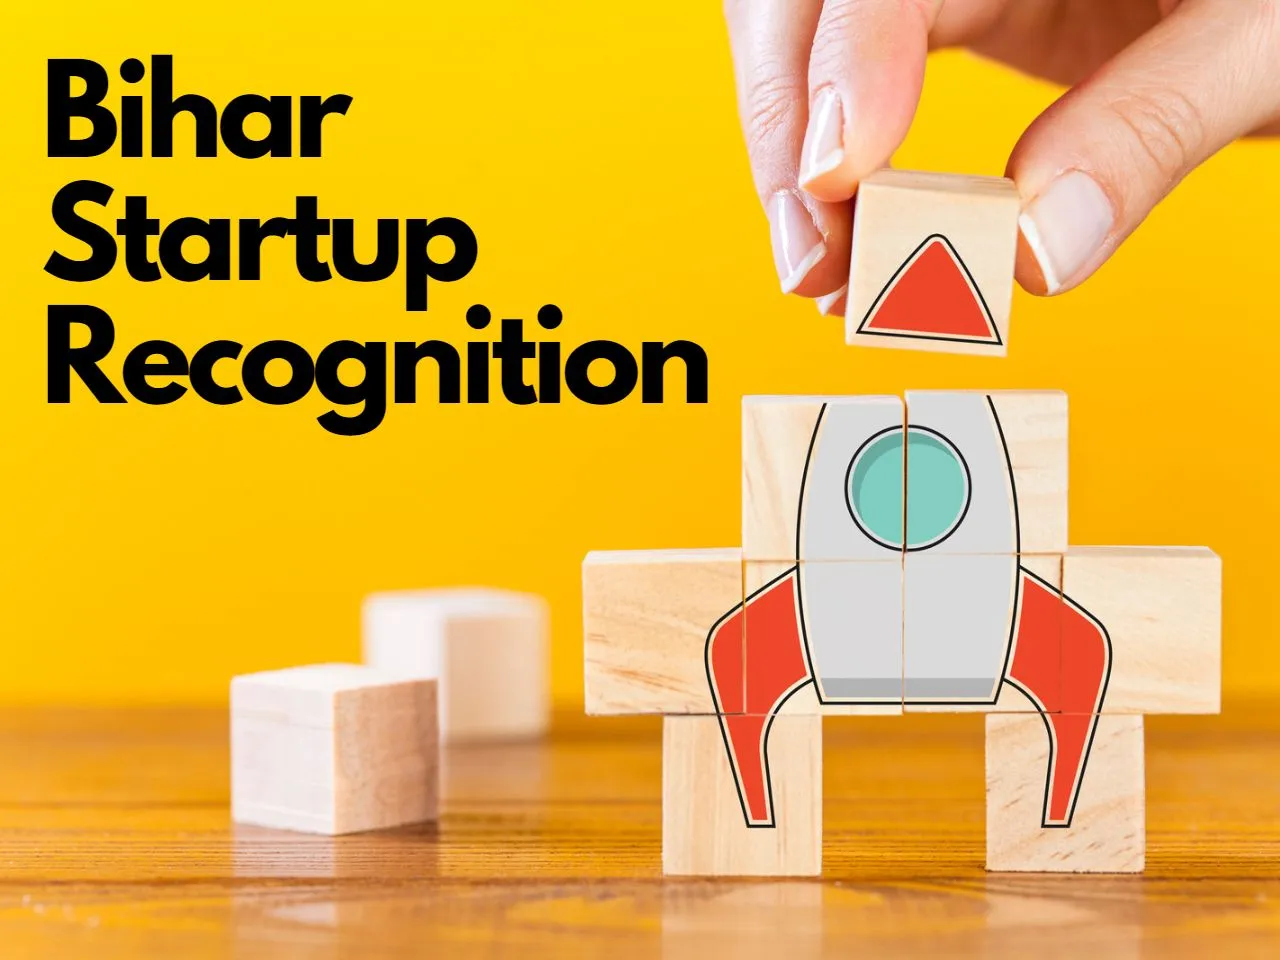 How to get your startup recognized in Bihar?